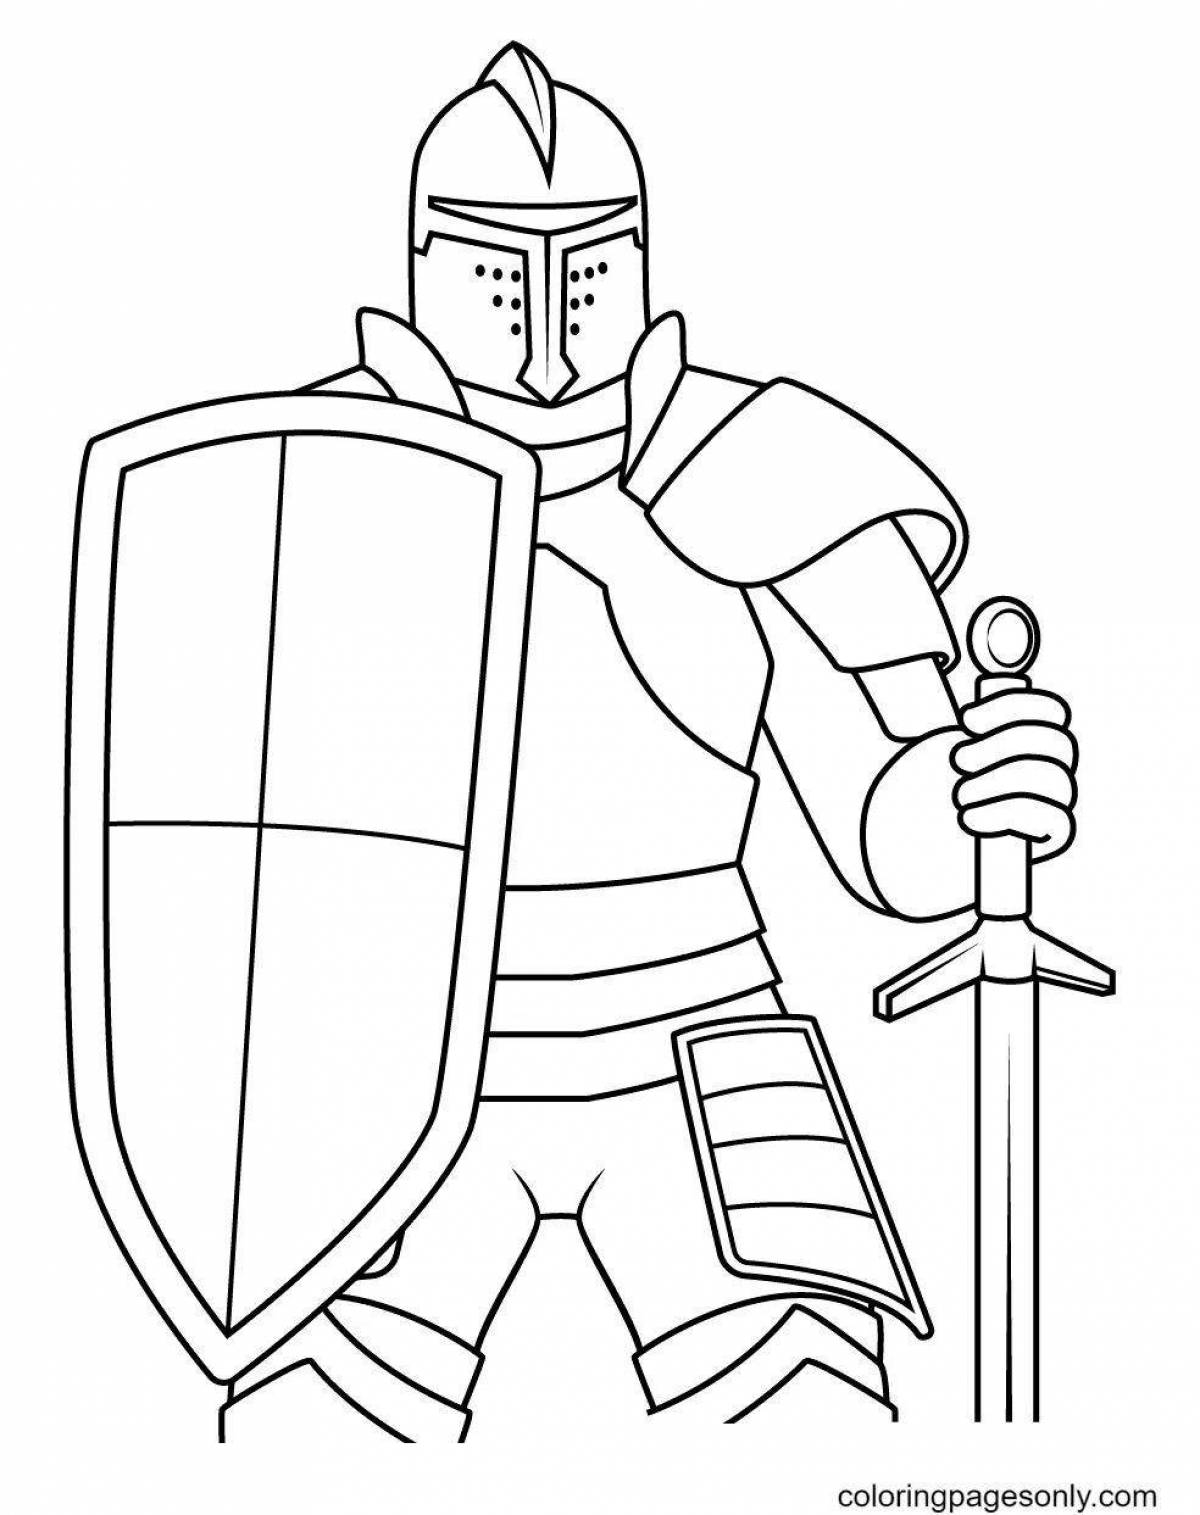 Fearless knight coloring book for kids